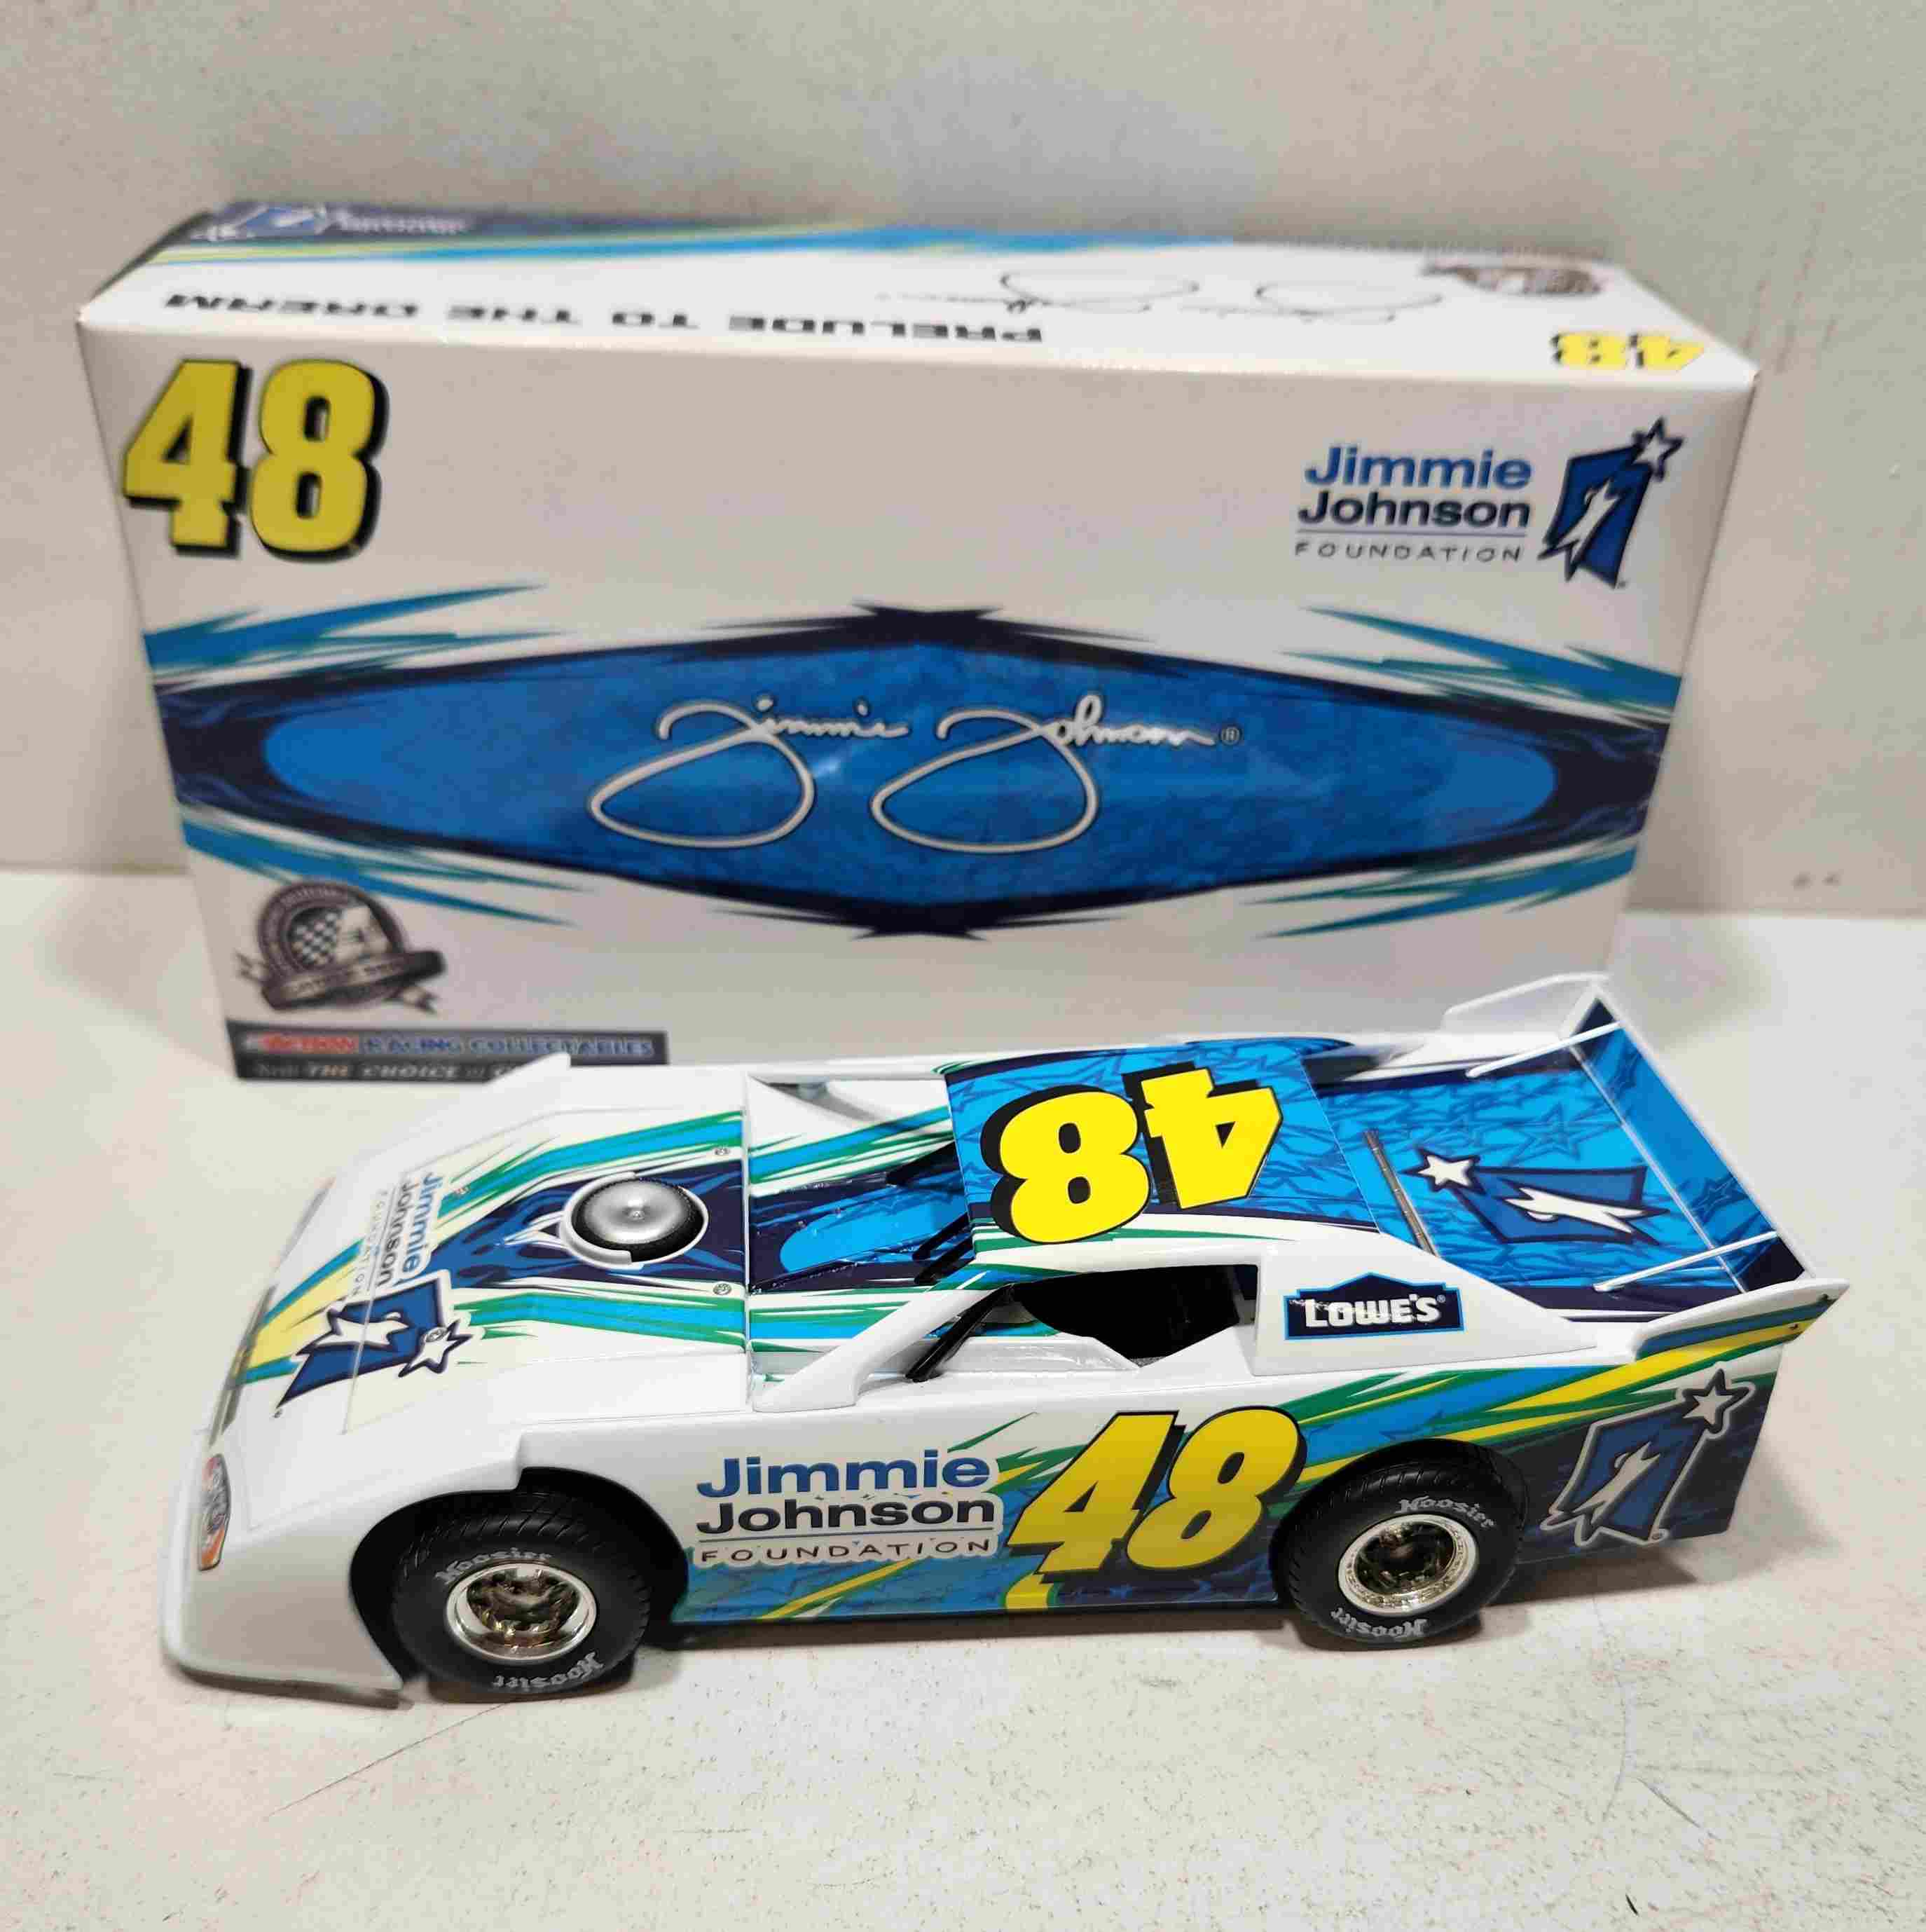 2008 Jimmie Johnson 1/24th Lowes "Foundation" Late Model Dirt car